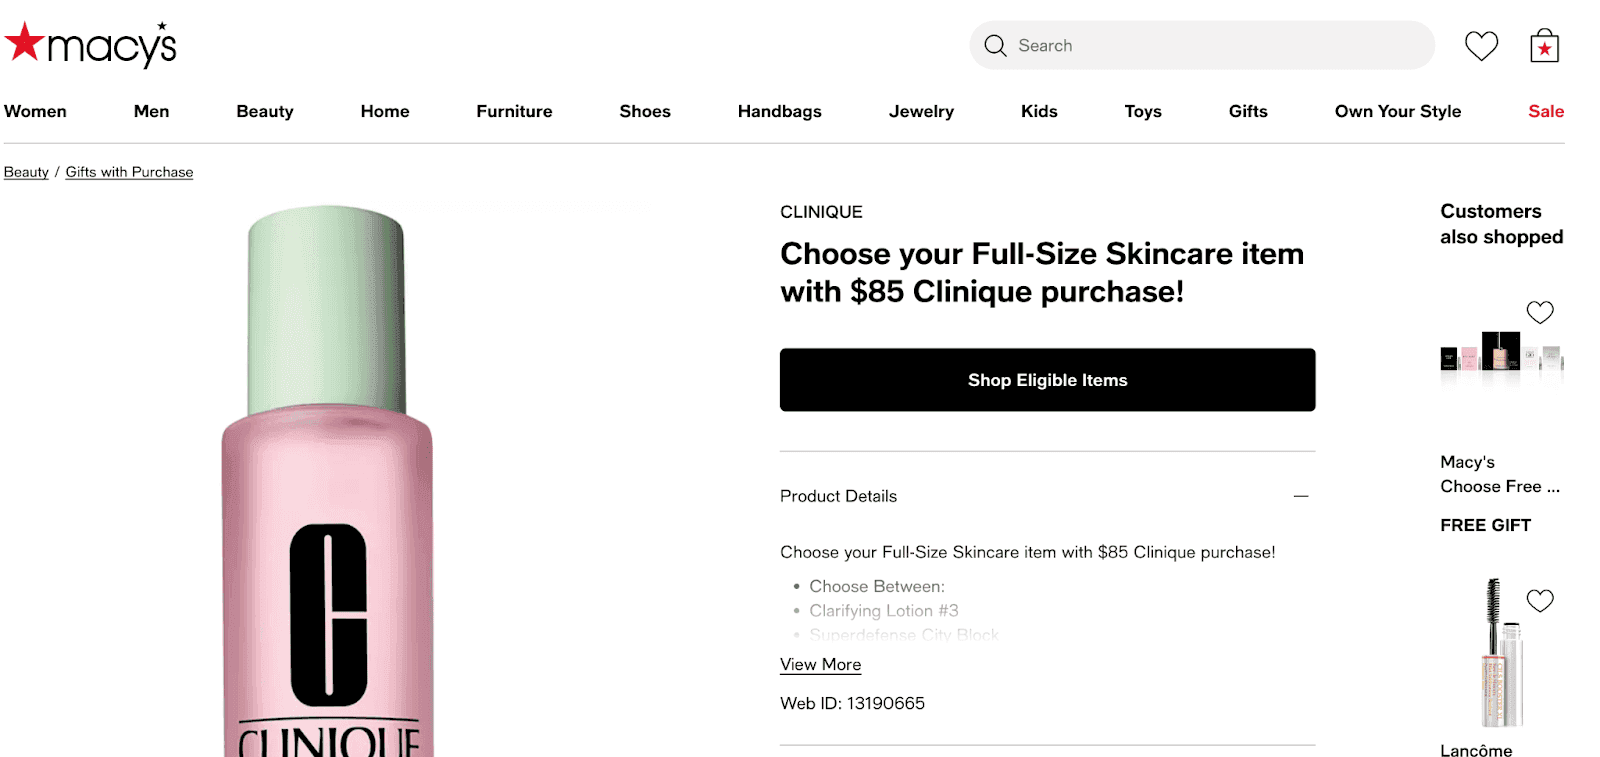 Screenshot of Macy's Clinique product "gift with purchase" deal